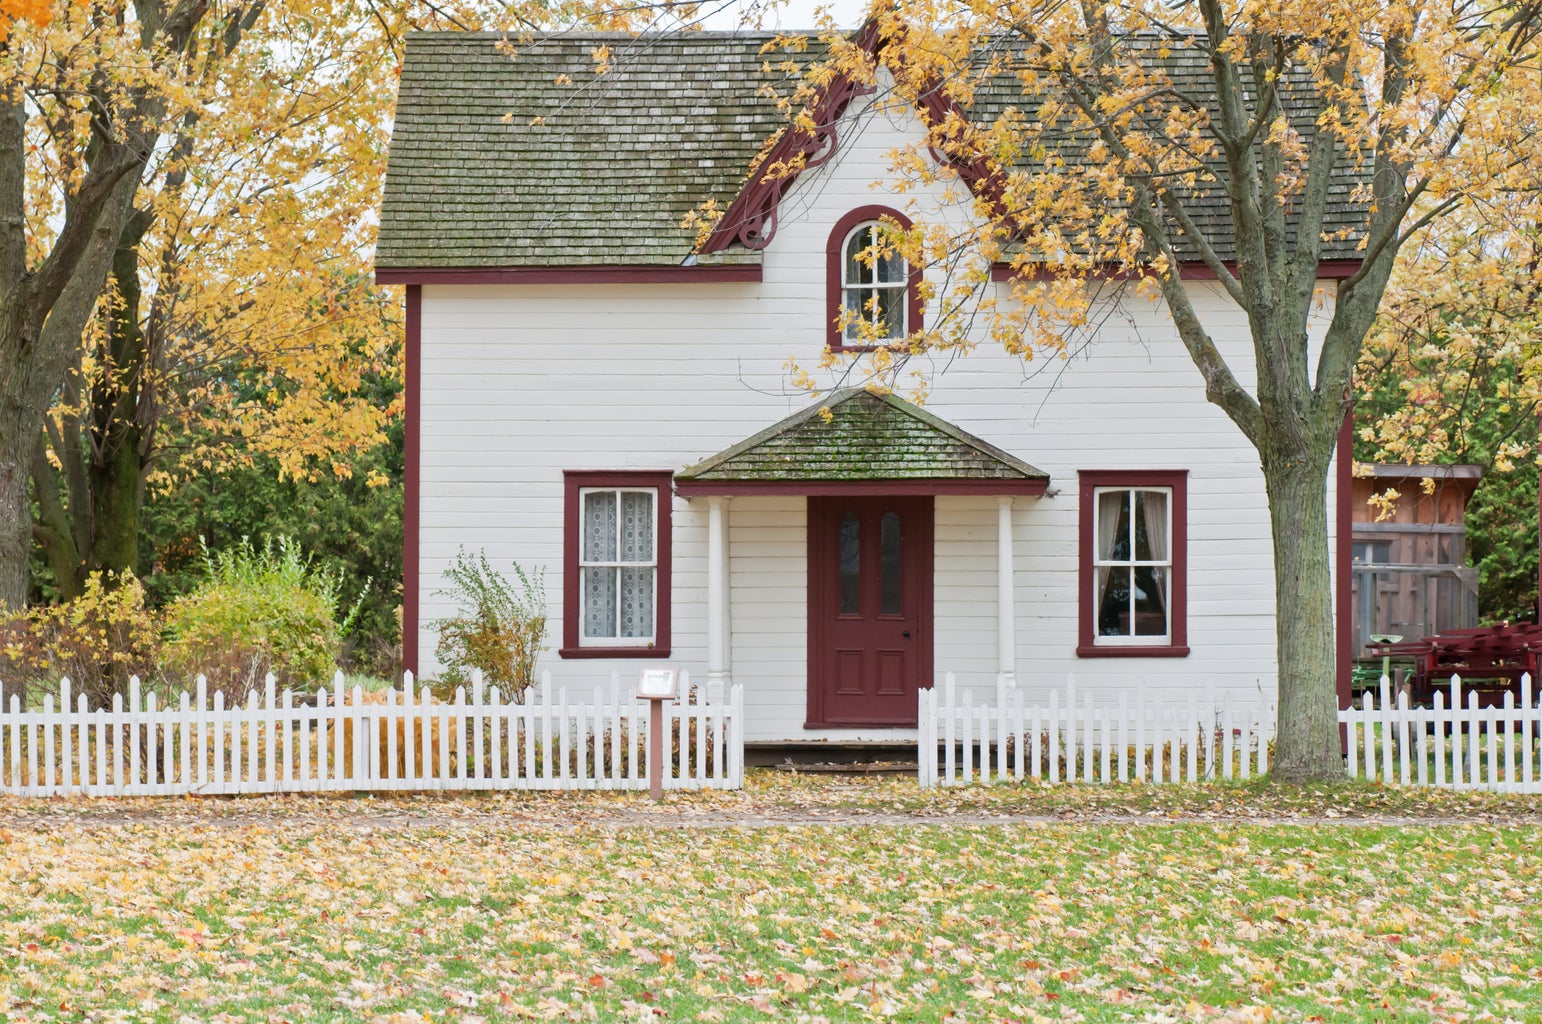 Small house on an autumn’s day. The house is white and there are bare trees in front of it.